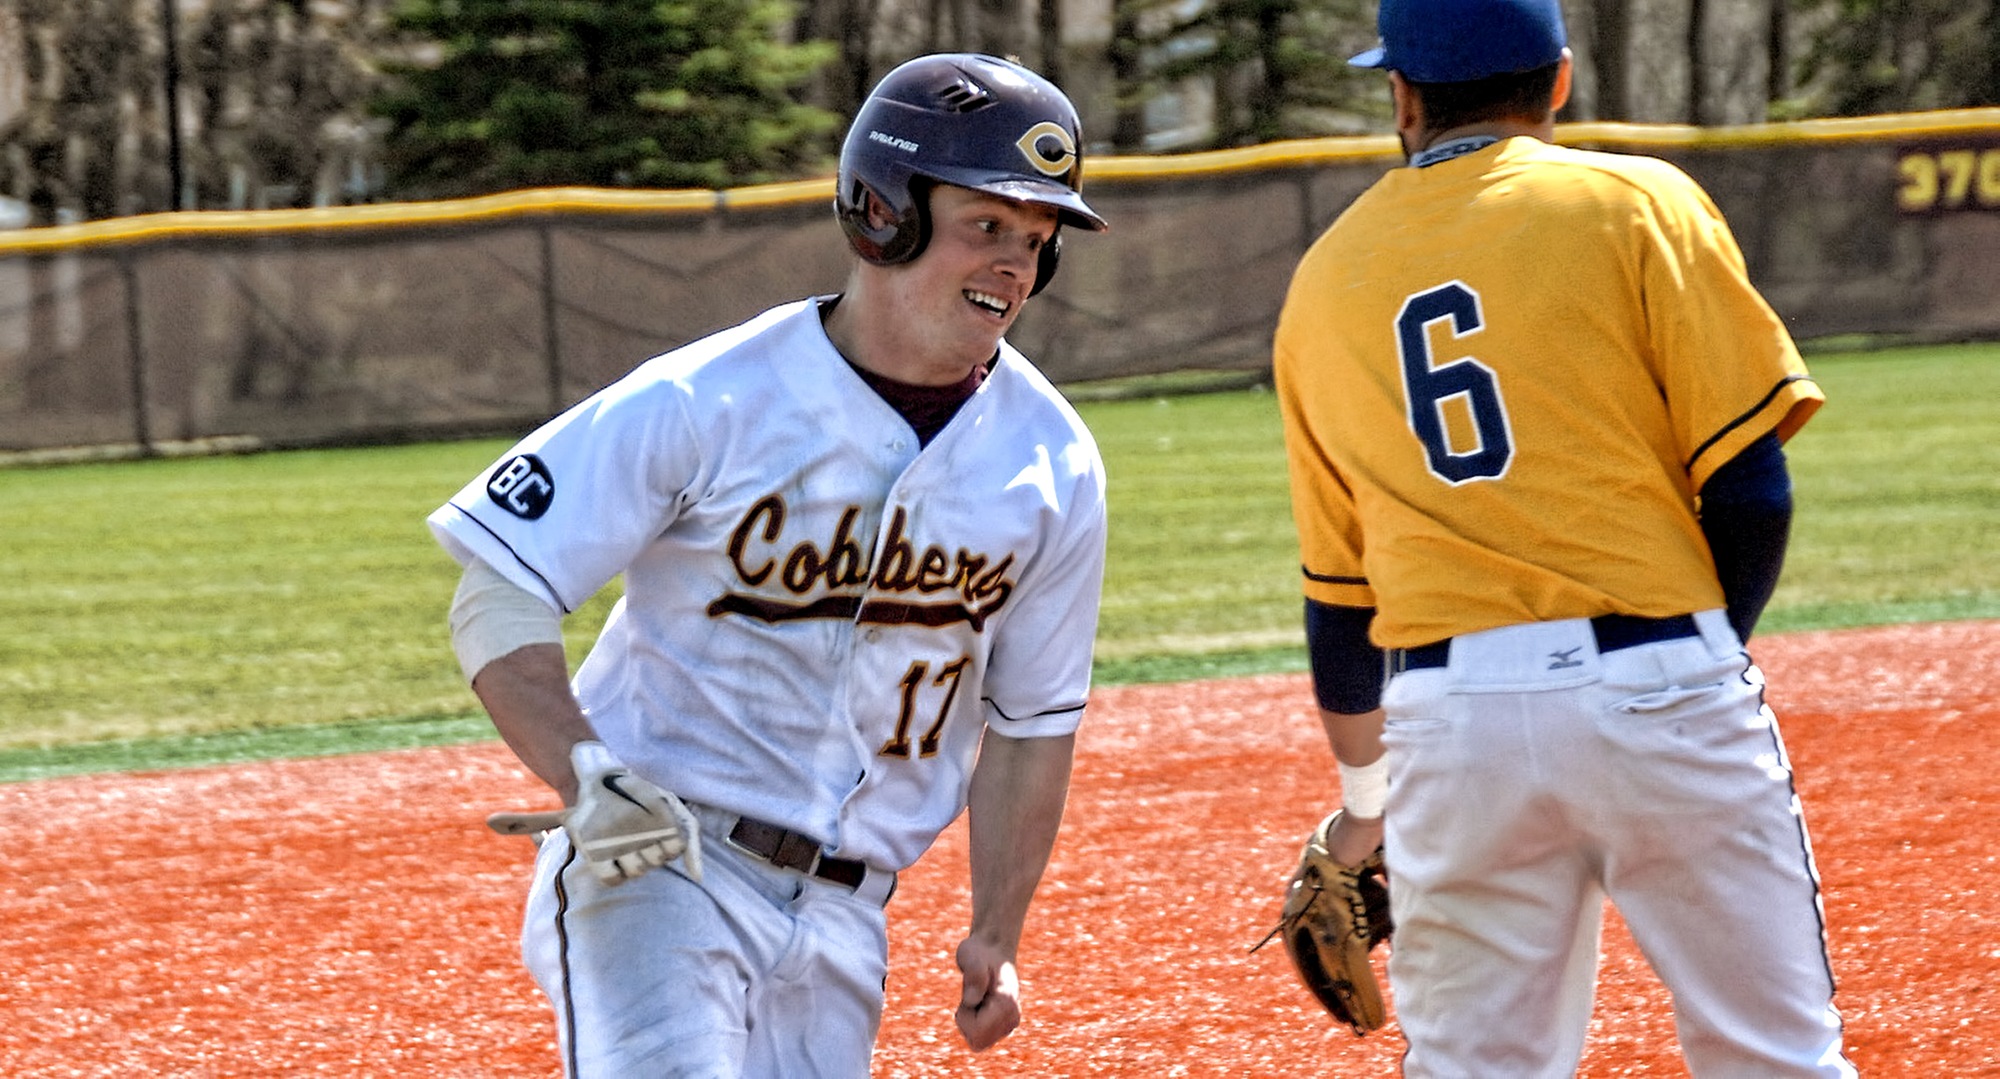 Sophomore Andy Gravdahl had a rare inside-the-park home run in the Cobbers' first of two win on Thursday. He also drove in the game-winning run in CC's 5-1 win over Gwynedd Mercy.